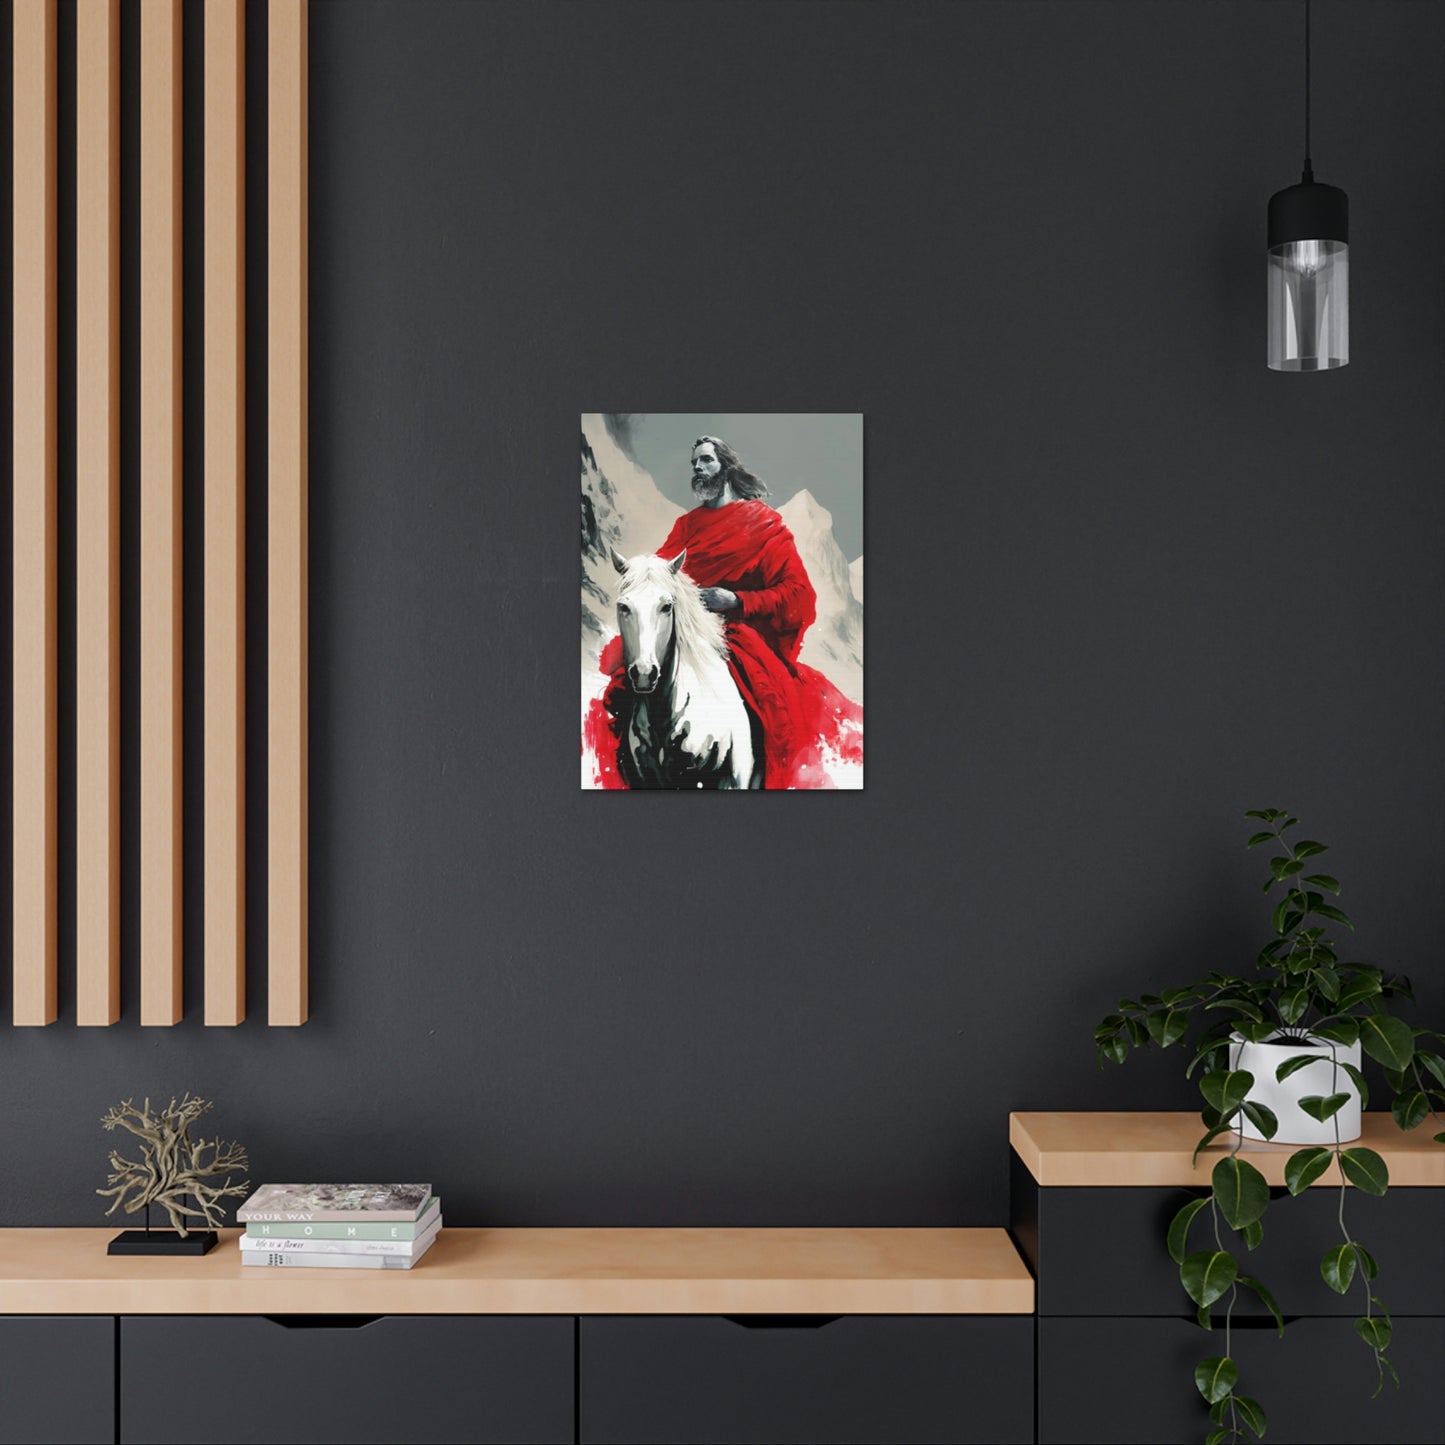 LDS Art - Art of The Second Coming of Jesus in Red on Horseback Premium Canvas Print